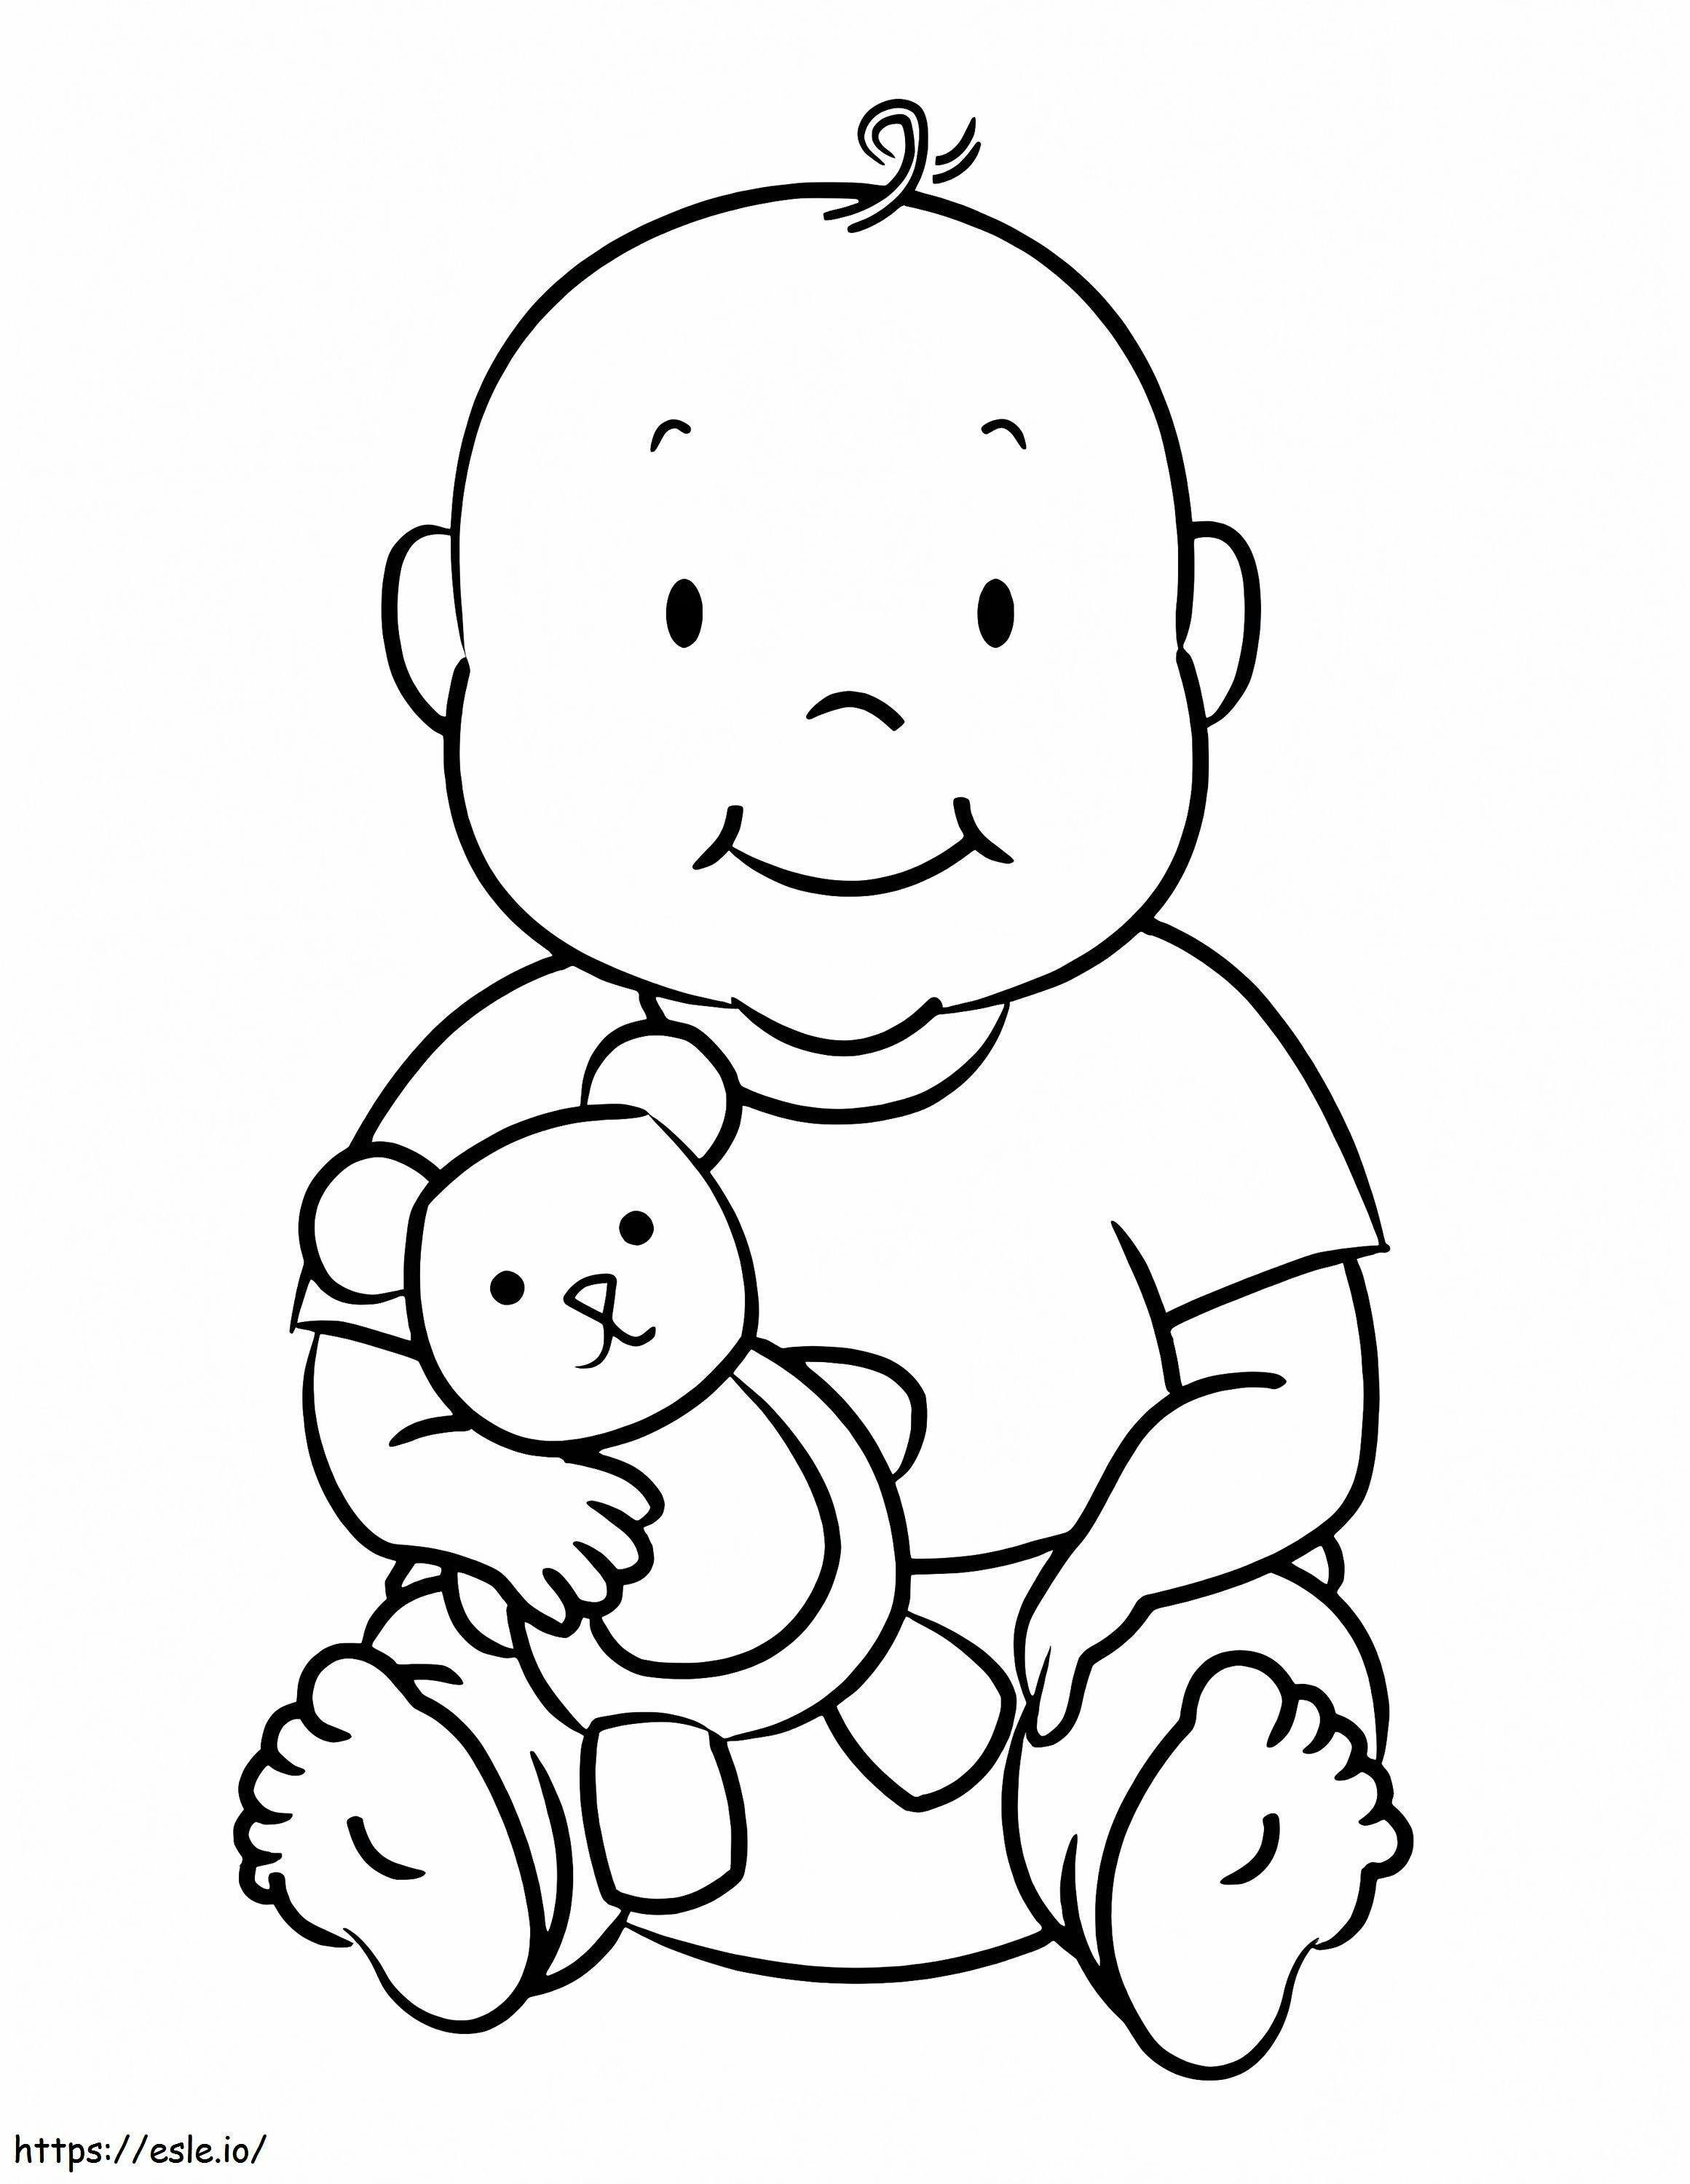 Baby And Teddy coloring page